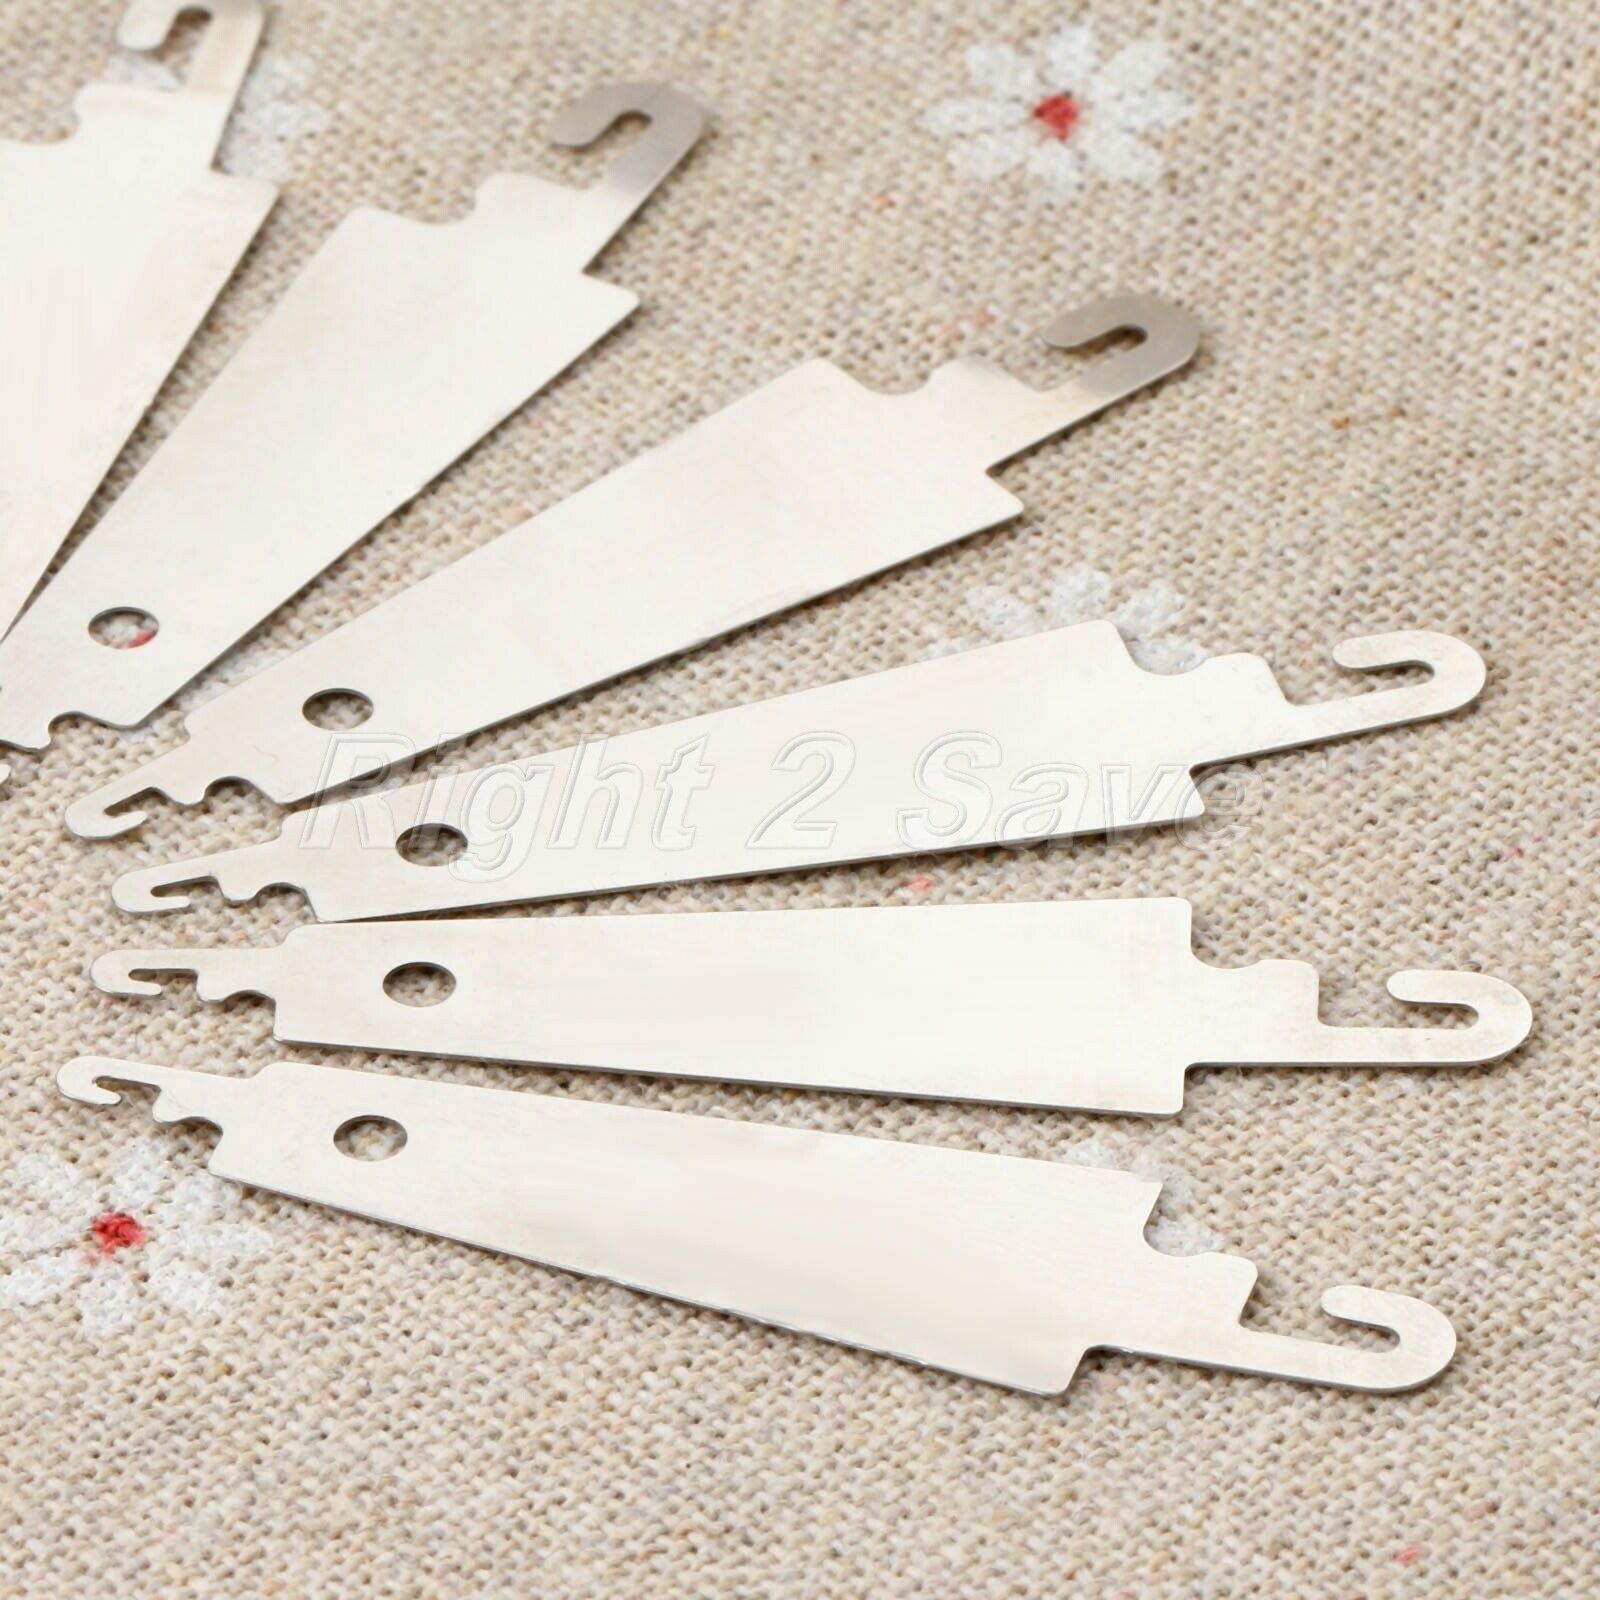 10pcs Stainless Steel Hook Needle Threader For Hand Sew Embroidery Cross Stitch